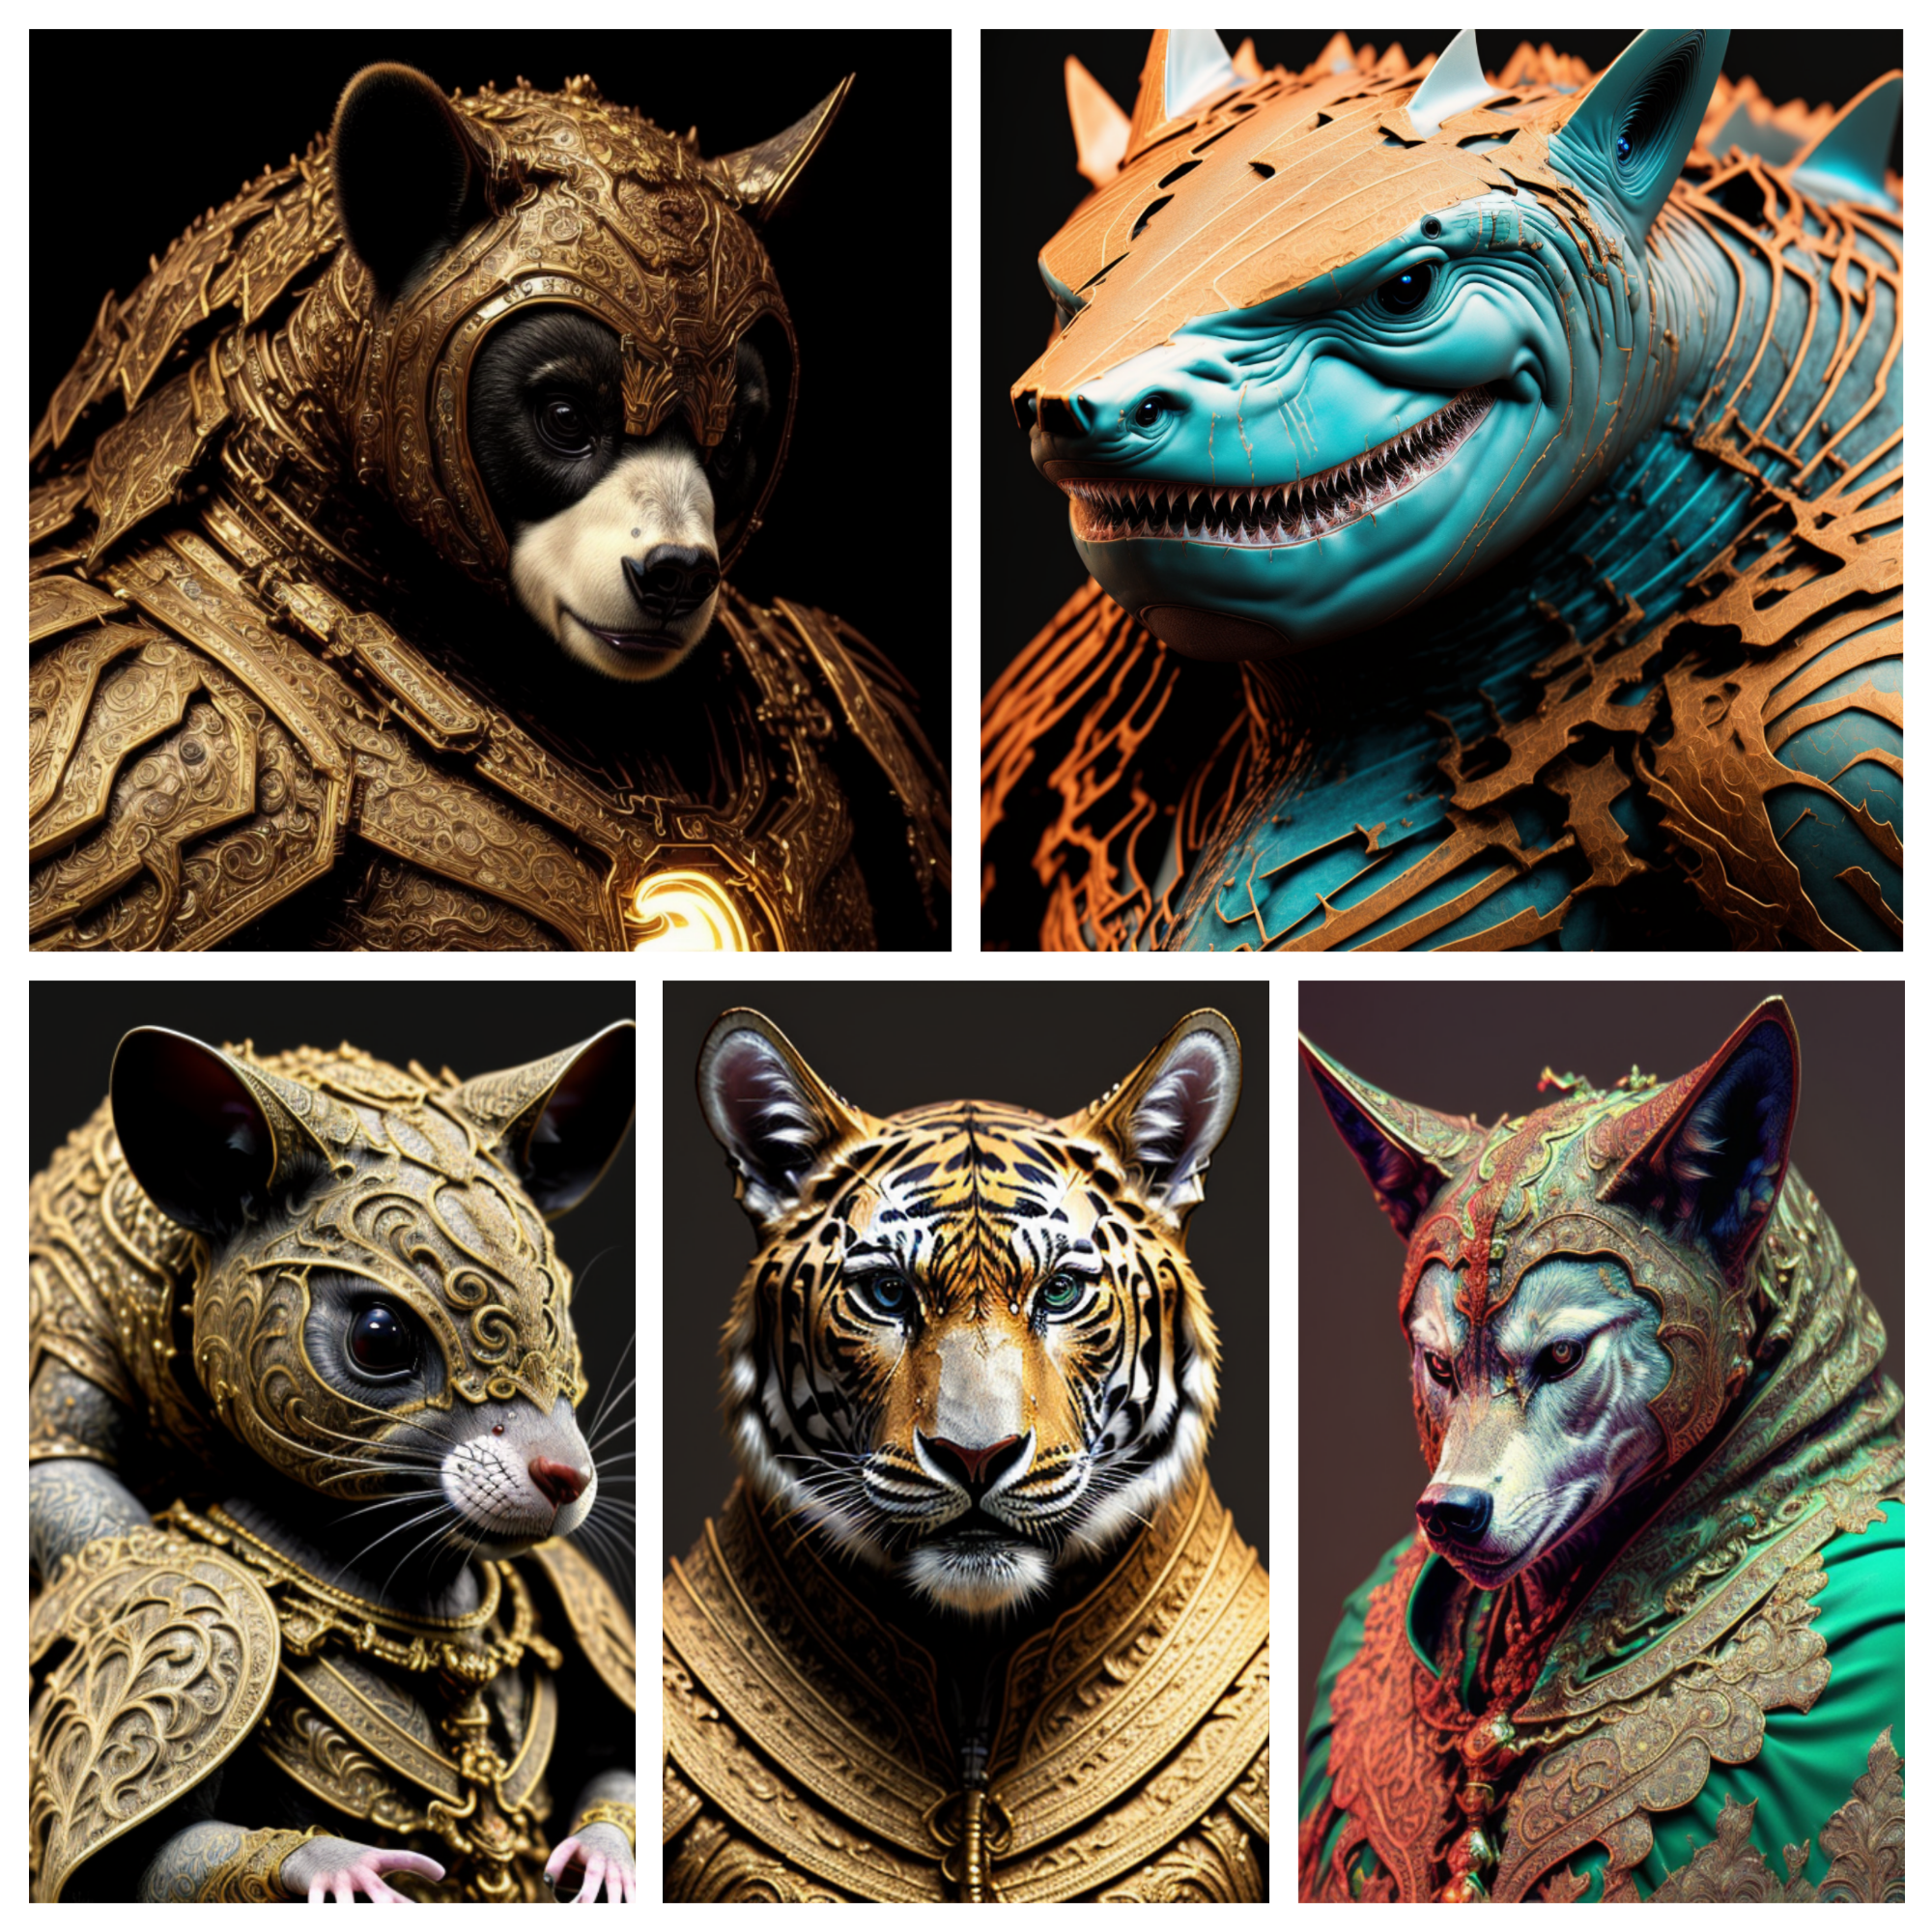 Gold Armor Portraits 1.5 RichStyle image by RICHVIP